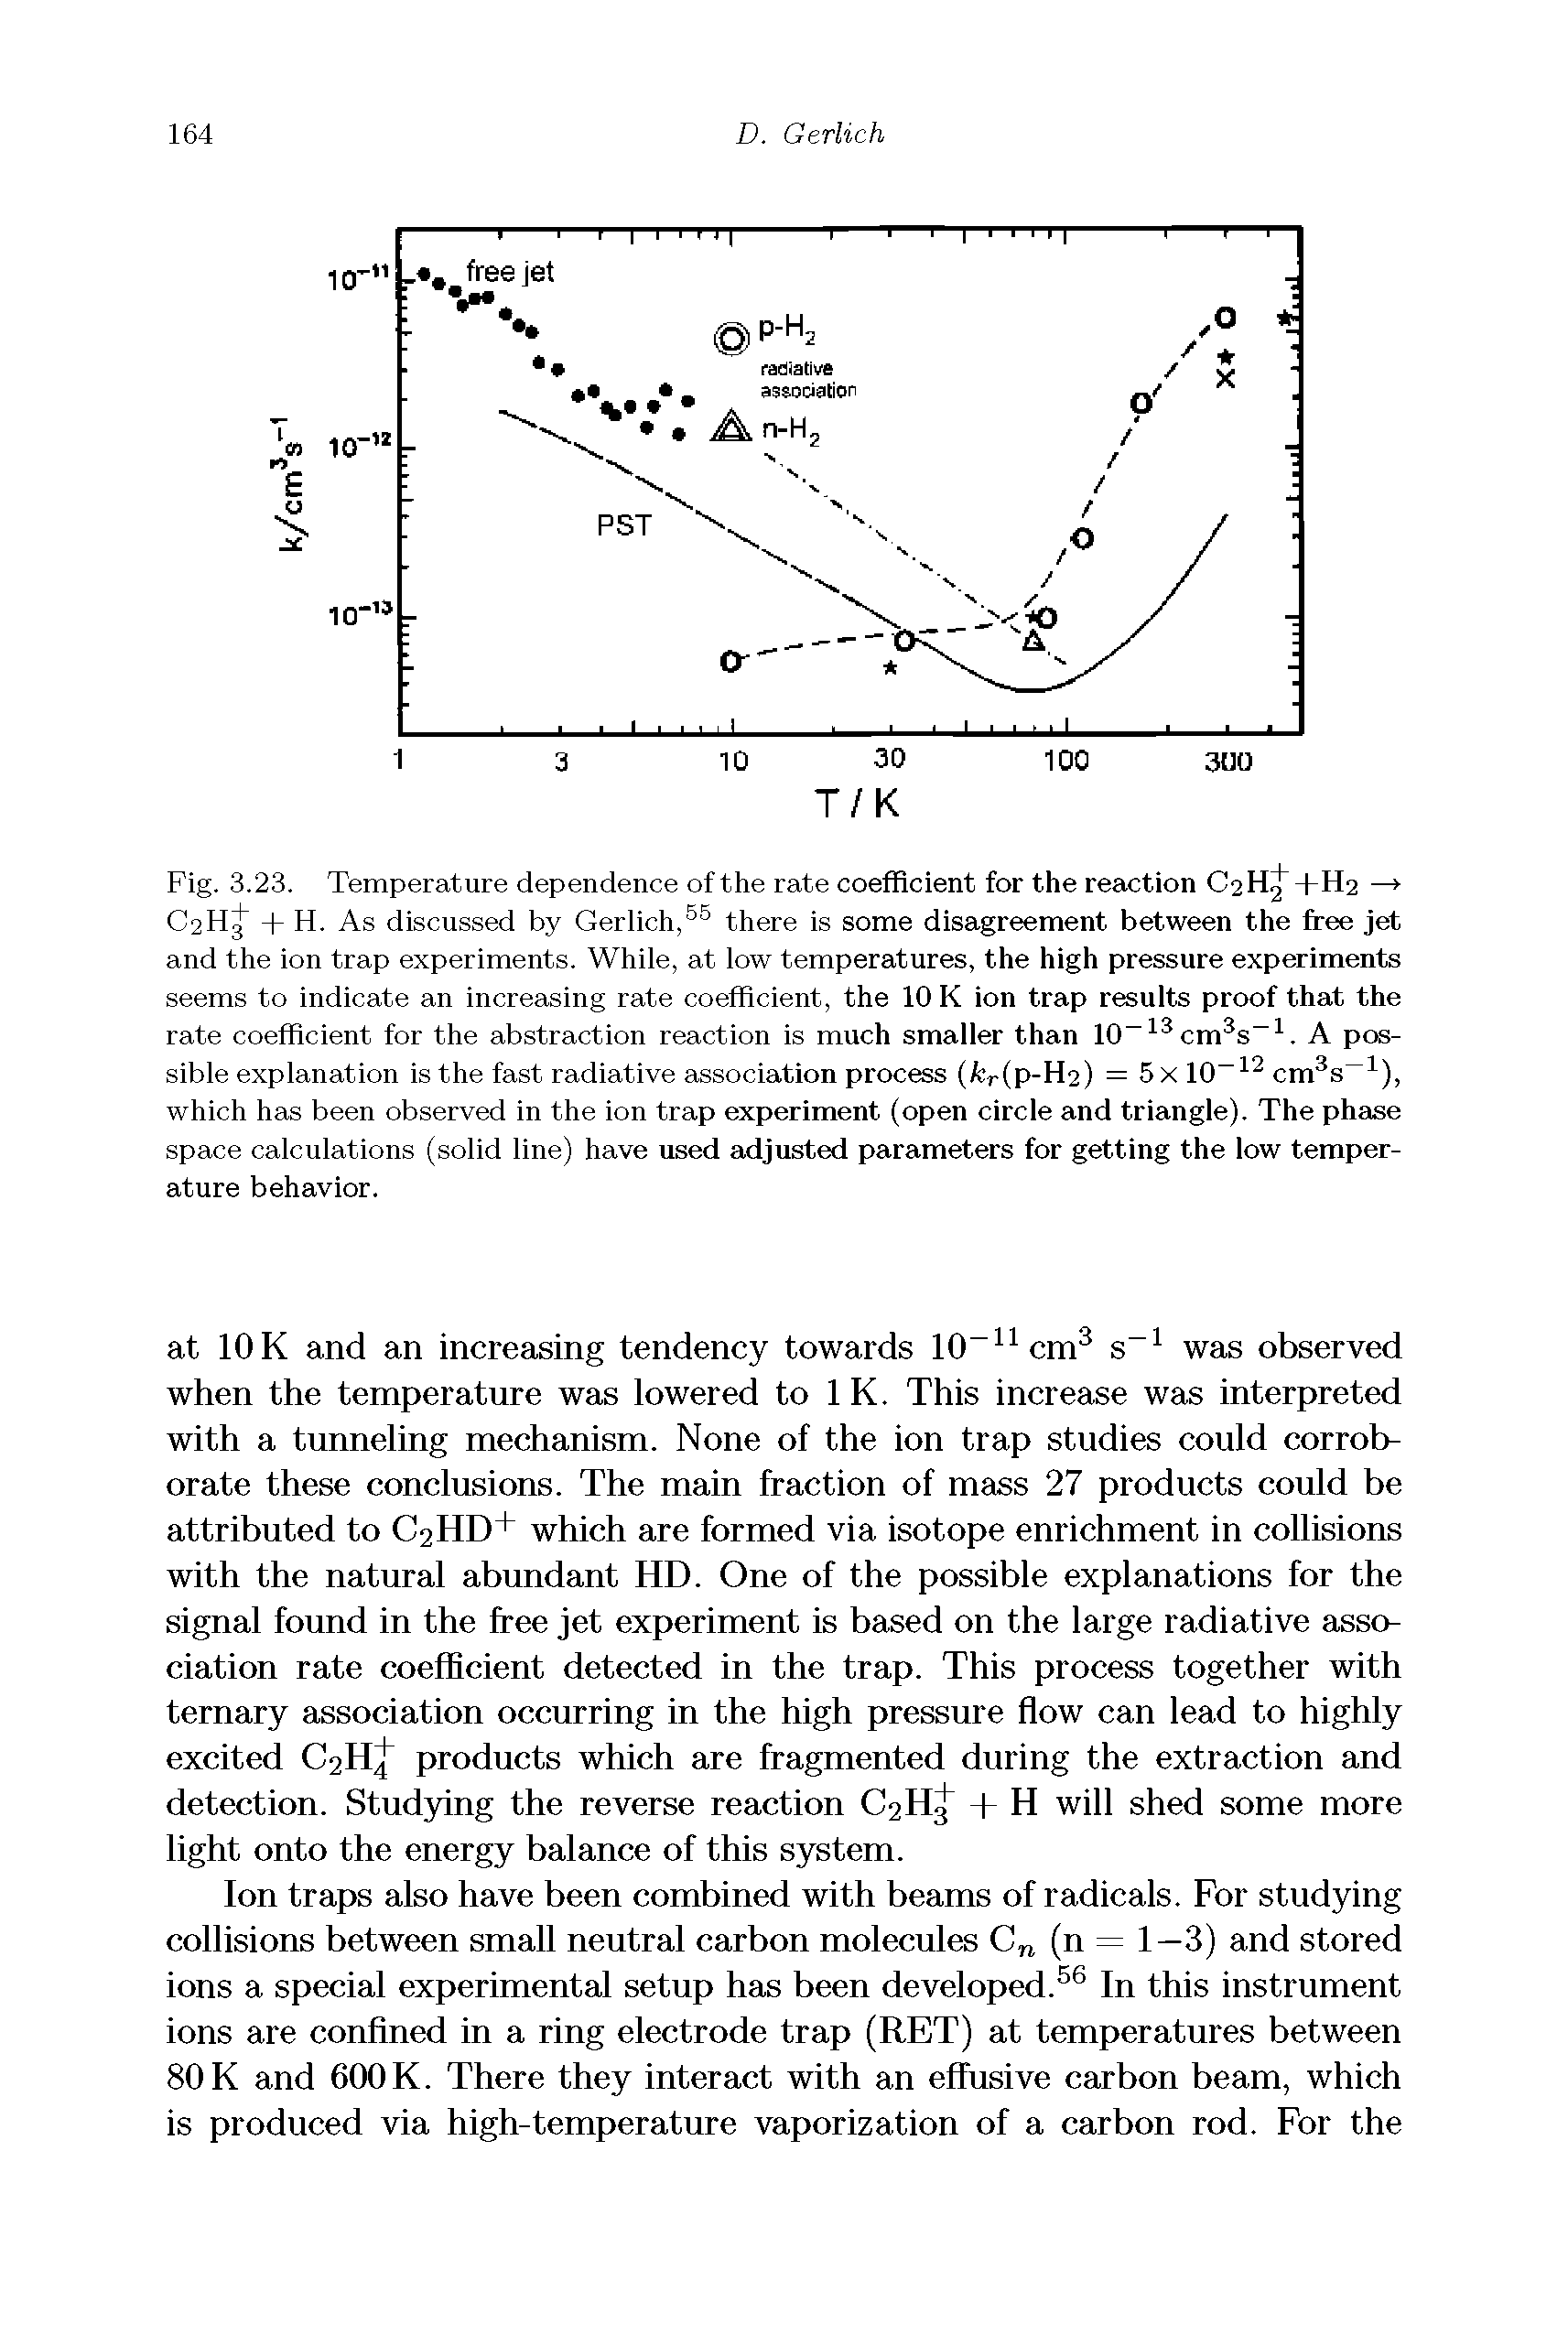 Fig. 3.23. Temperature dependence of the rate coefficient for the reaction C2HJ+H2 —> C2H + H. As discussed by Gerlich, there is some disagreement between the free jet and the ion trap experiments. While, at low temperatures, the high pressure experiments seems to indicate an increasing rate coefficient, the 10 K ion trap results proof that the rate coefficient for the abstraction reaction is much smaller than 10 cm s . A possible explanation is the fast radiative association process (fcr(p-H2) = 5 X 10 cm s ), which has been observed in the ion trap experiment (open circle and triangle). The phase space calculations (solid line) have used adjusted parameters for getting the low temperature behavior.